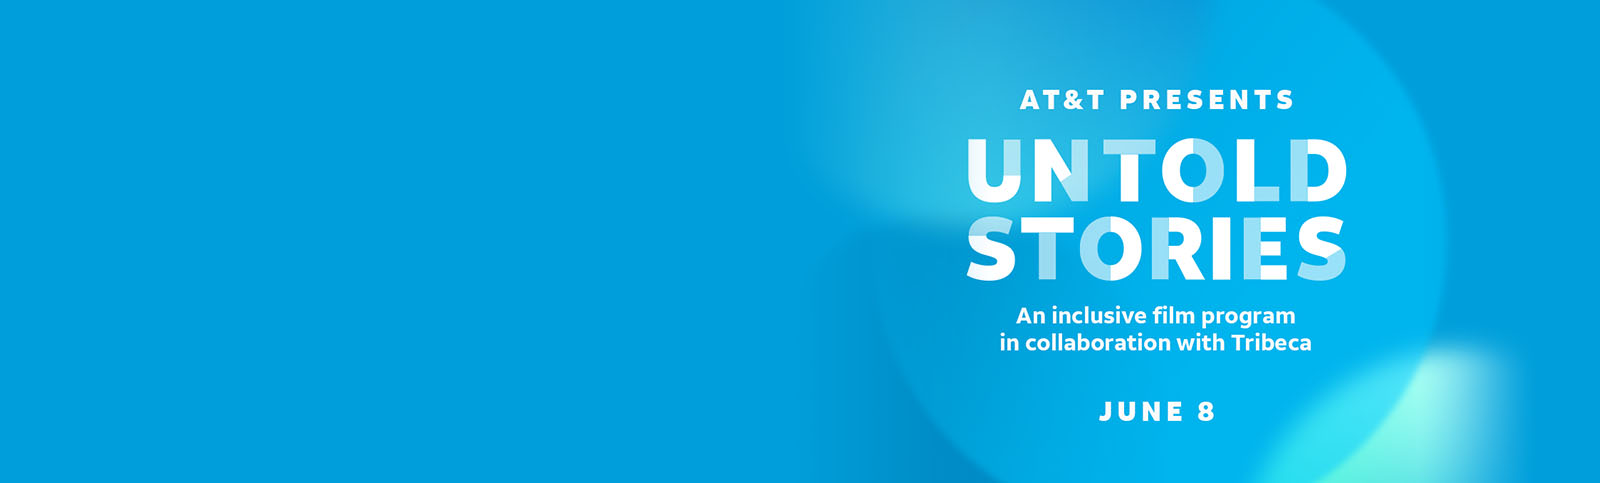 AT&T presents Untold Stories, an inclusive film program in collaboration with Tribeca on June 8.